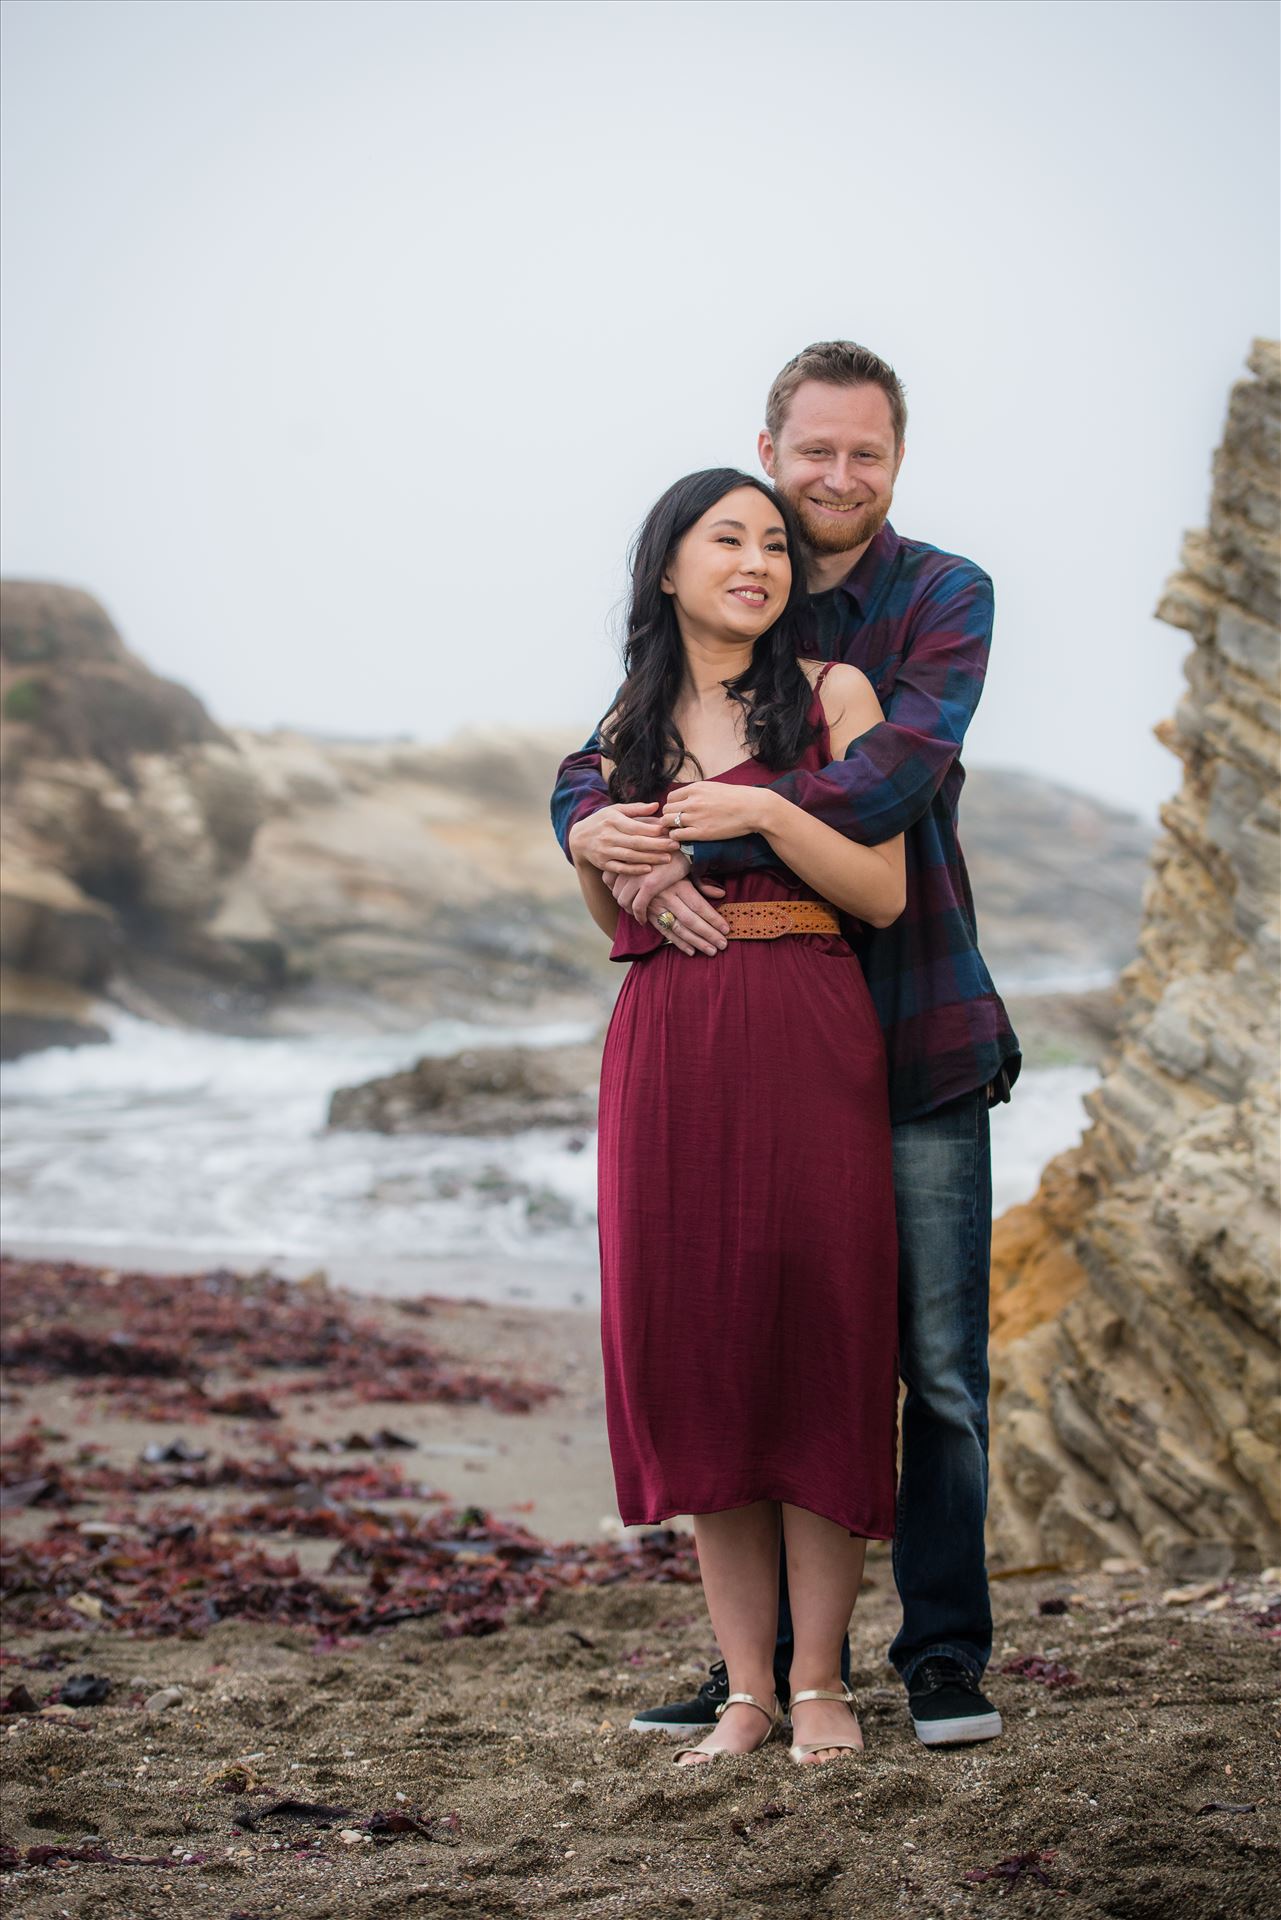 Carmen and Josh 01 Montana de Oro Spooners Cove Engagement Photography Los Osos California.  Romance by the sea by Sarah Williams